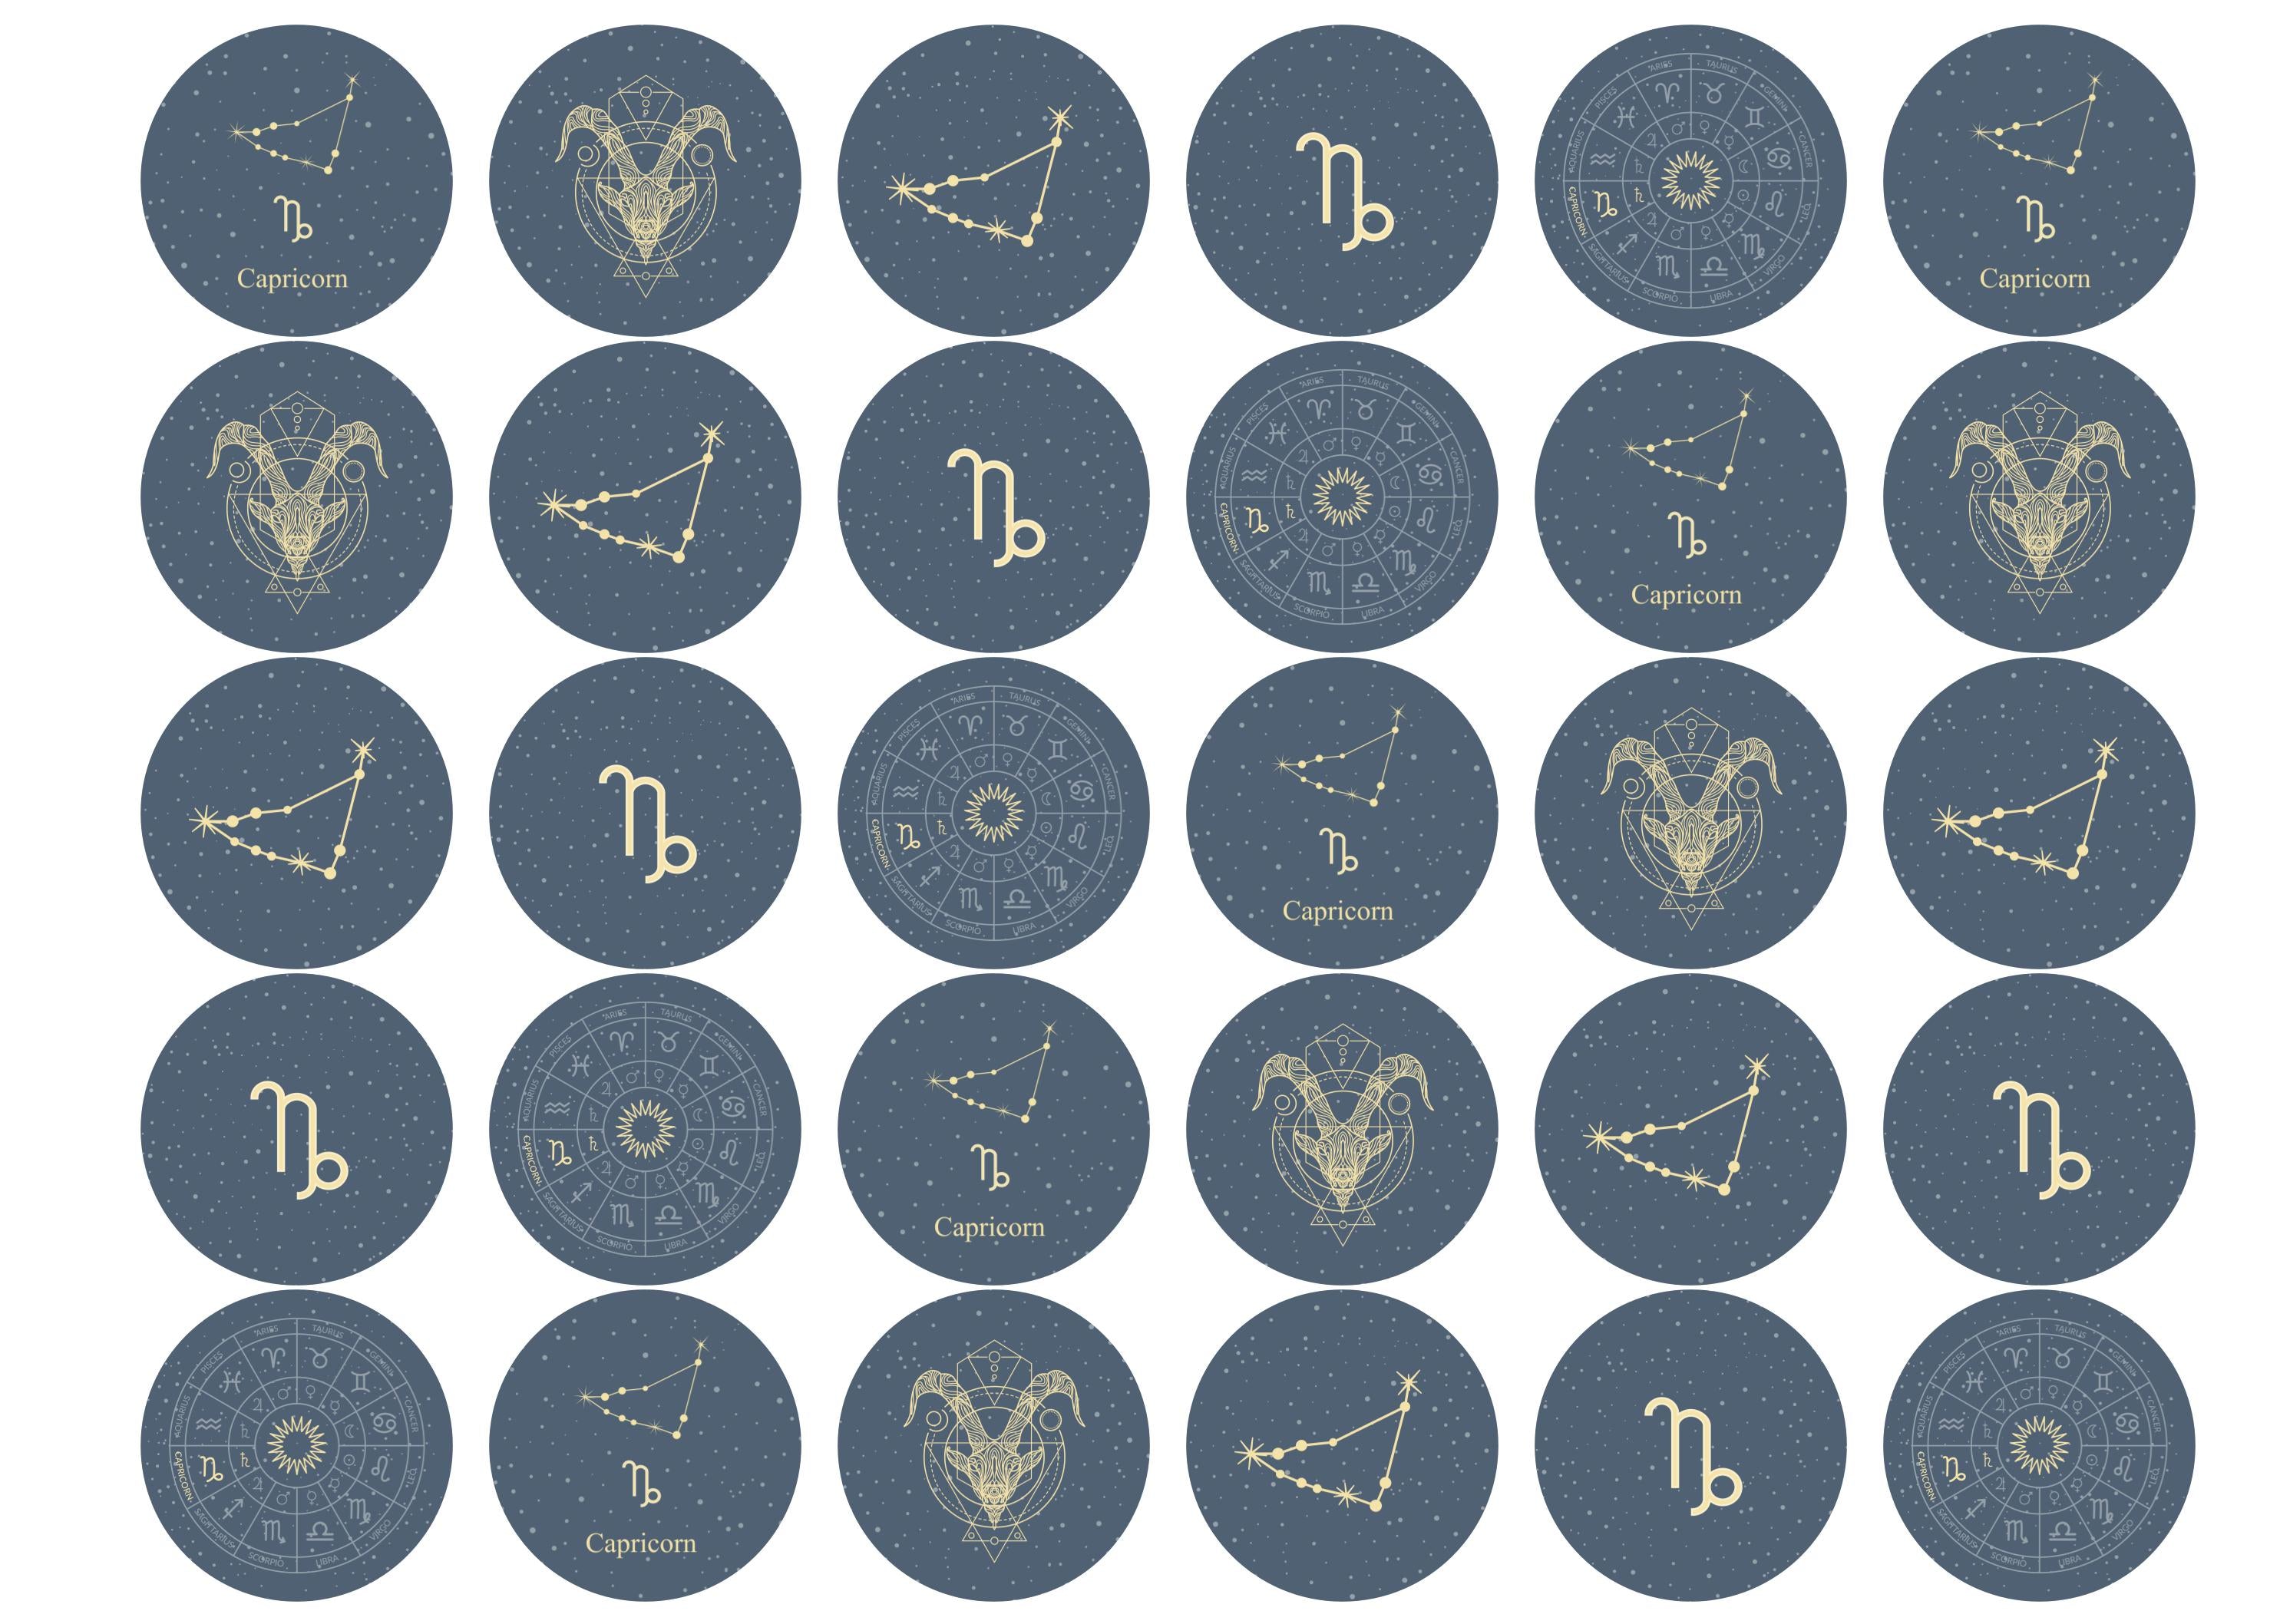 30 edible toppers with Capricorn zodiac star sign designs